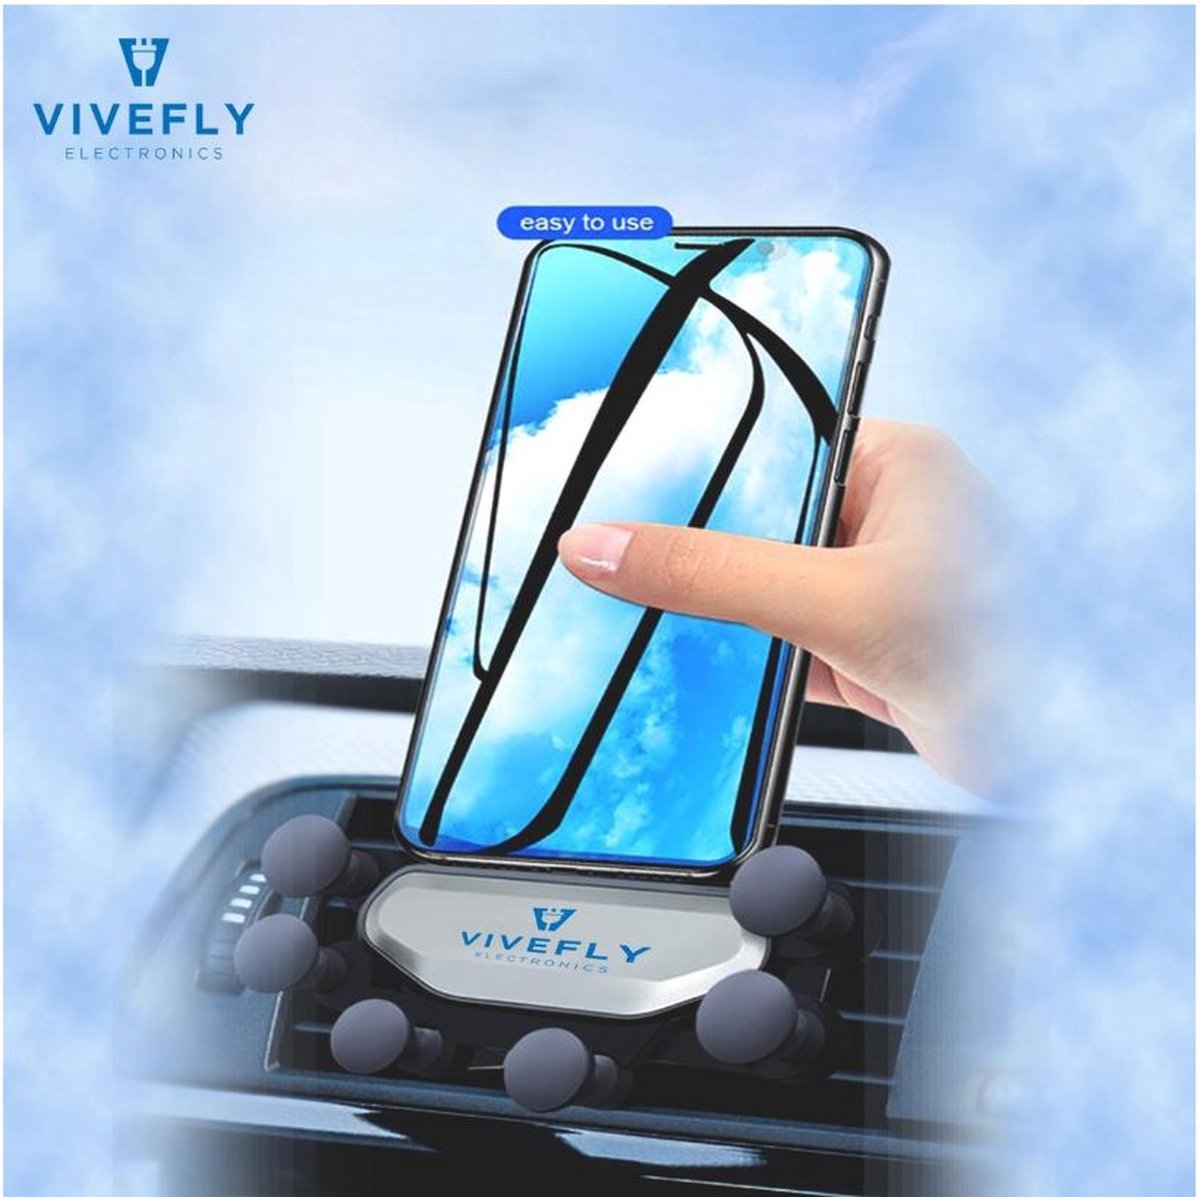 Vivefly Electronics Gravity Holder - Telefoonhouder - GSM Houder - Telefoonhouders - Auto Dashboard Houder - Telefoonhouder Auto - Mobiele Telefoonhouder - Auto Accessories